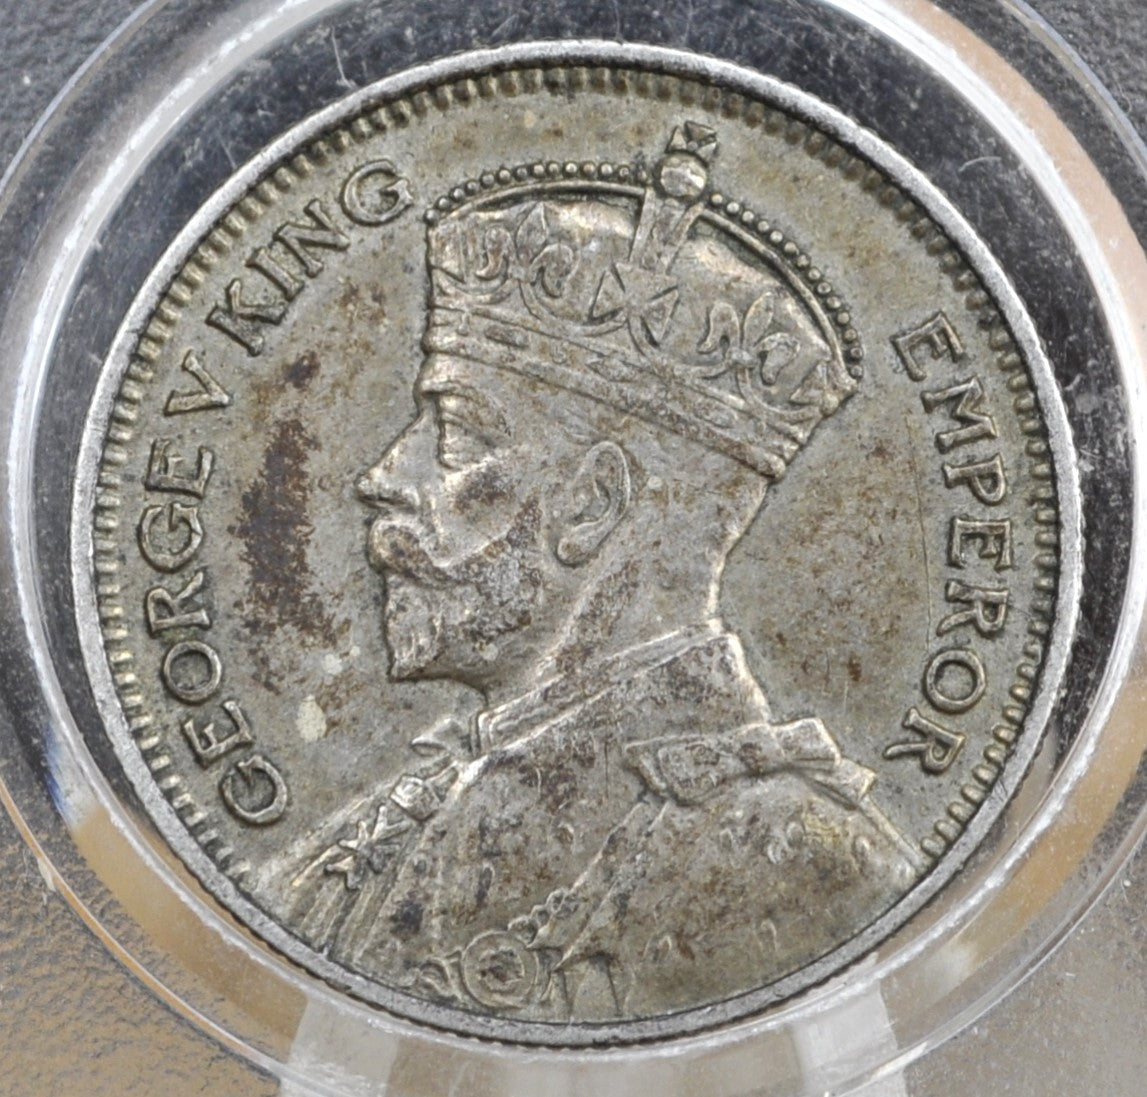 1934 New Zealand Silver Sixpence - Great Condition, XF - 50% Silver - 1934 New Zealand Six pence 6 Pence 1934